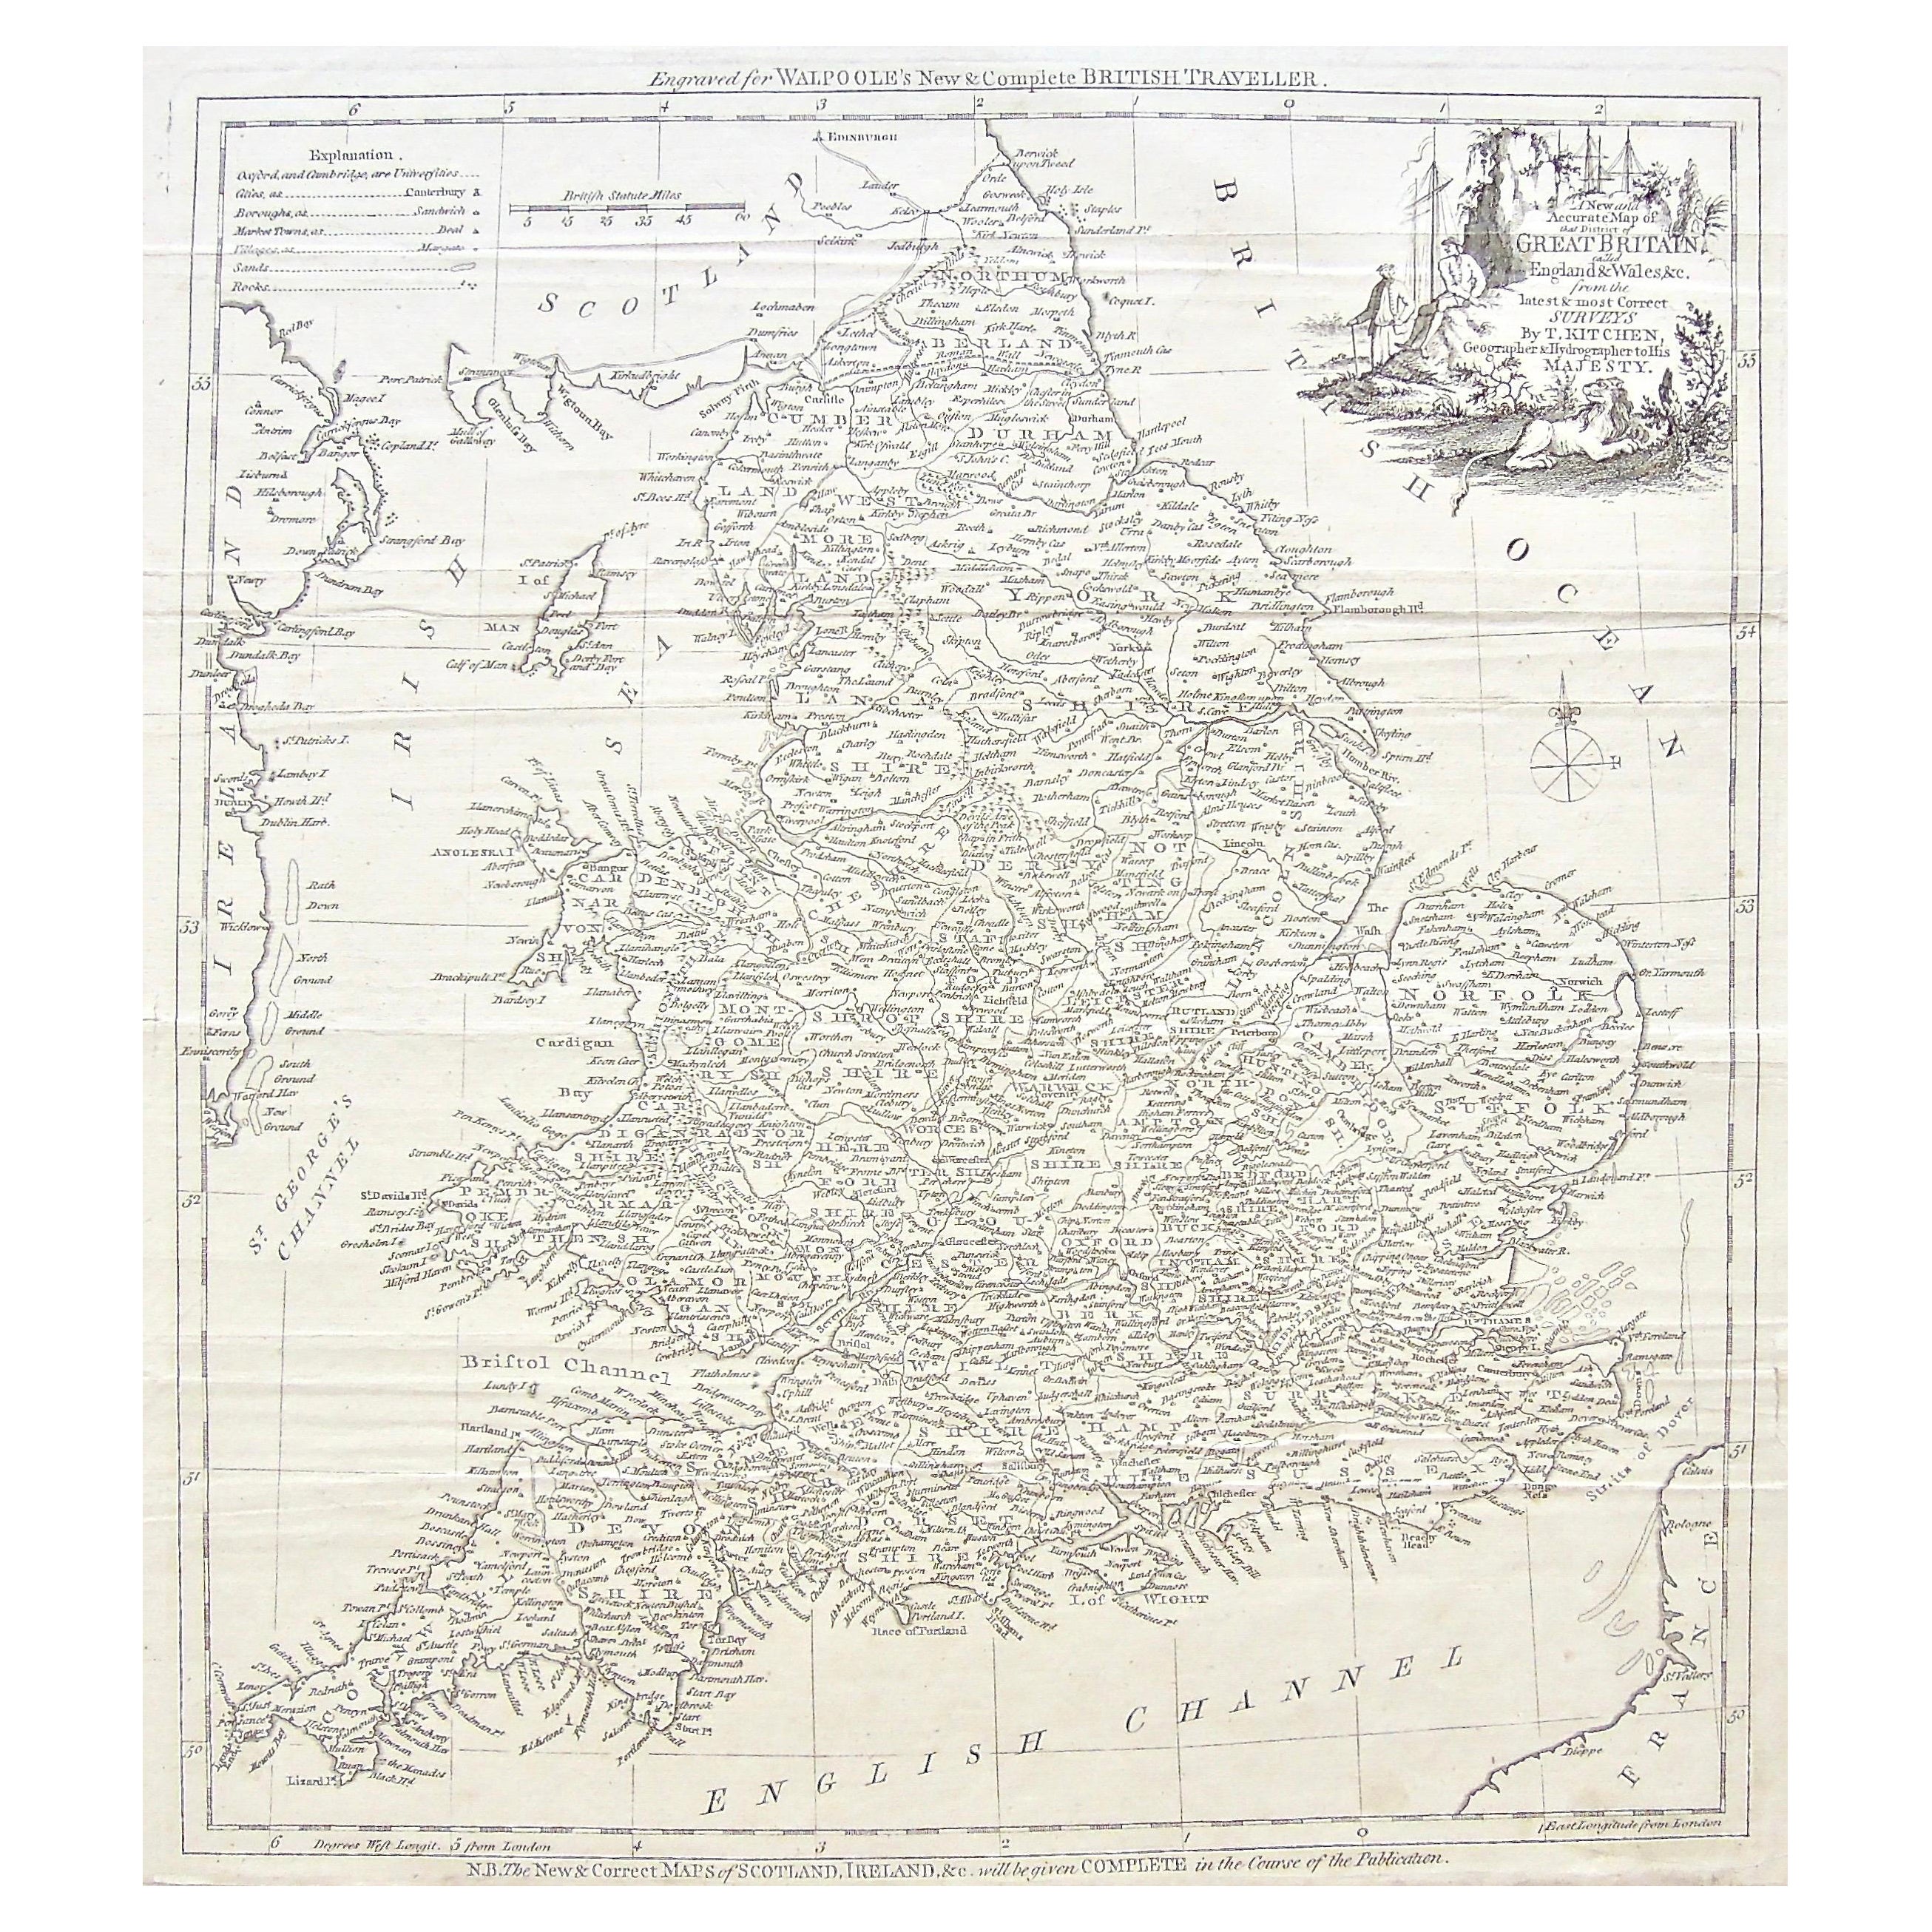 Original 1700s Map of Great Britain, England & Wales in 1757 by Thomas Kitchin